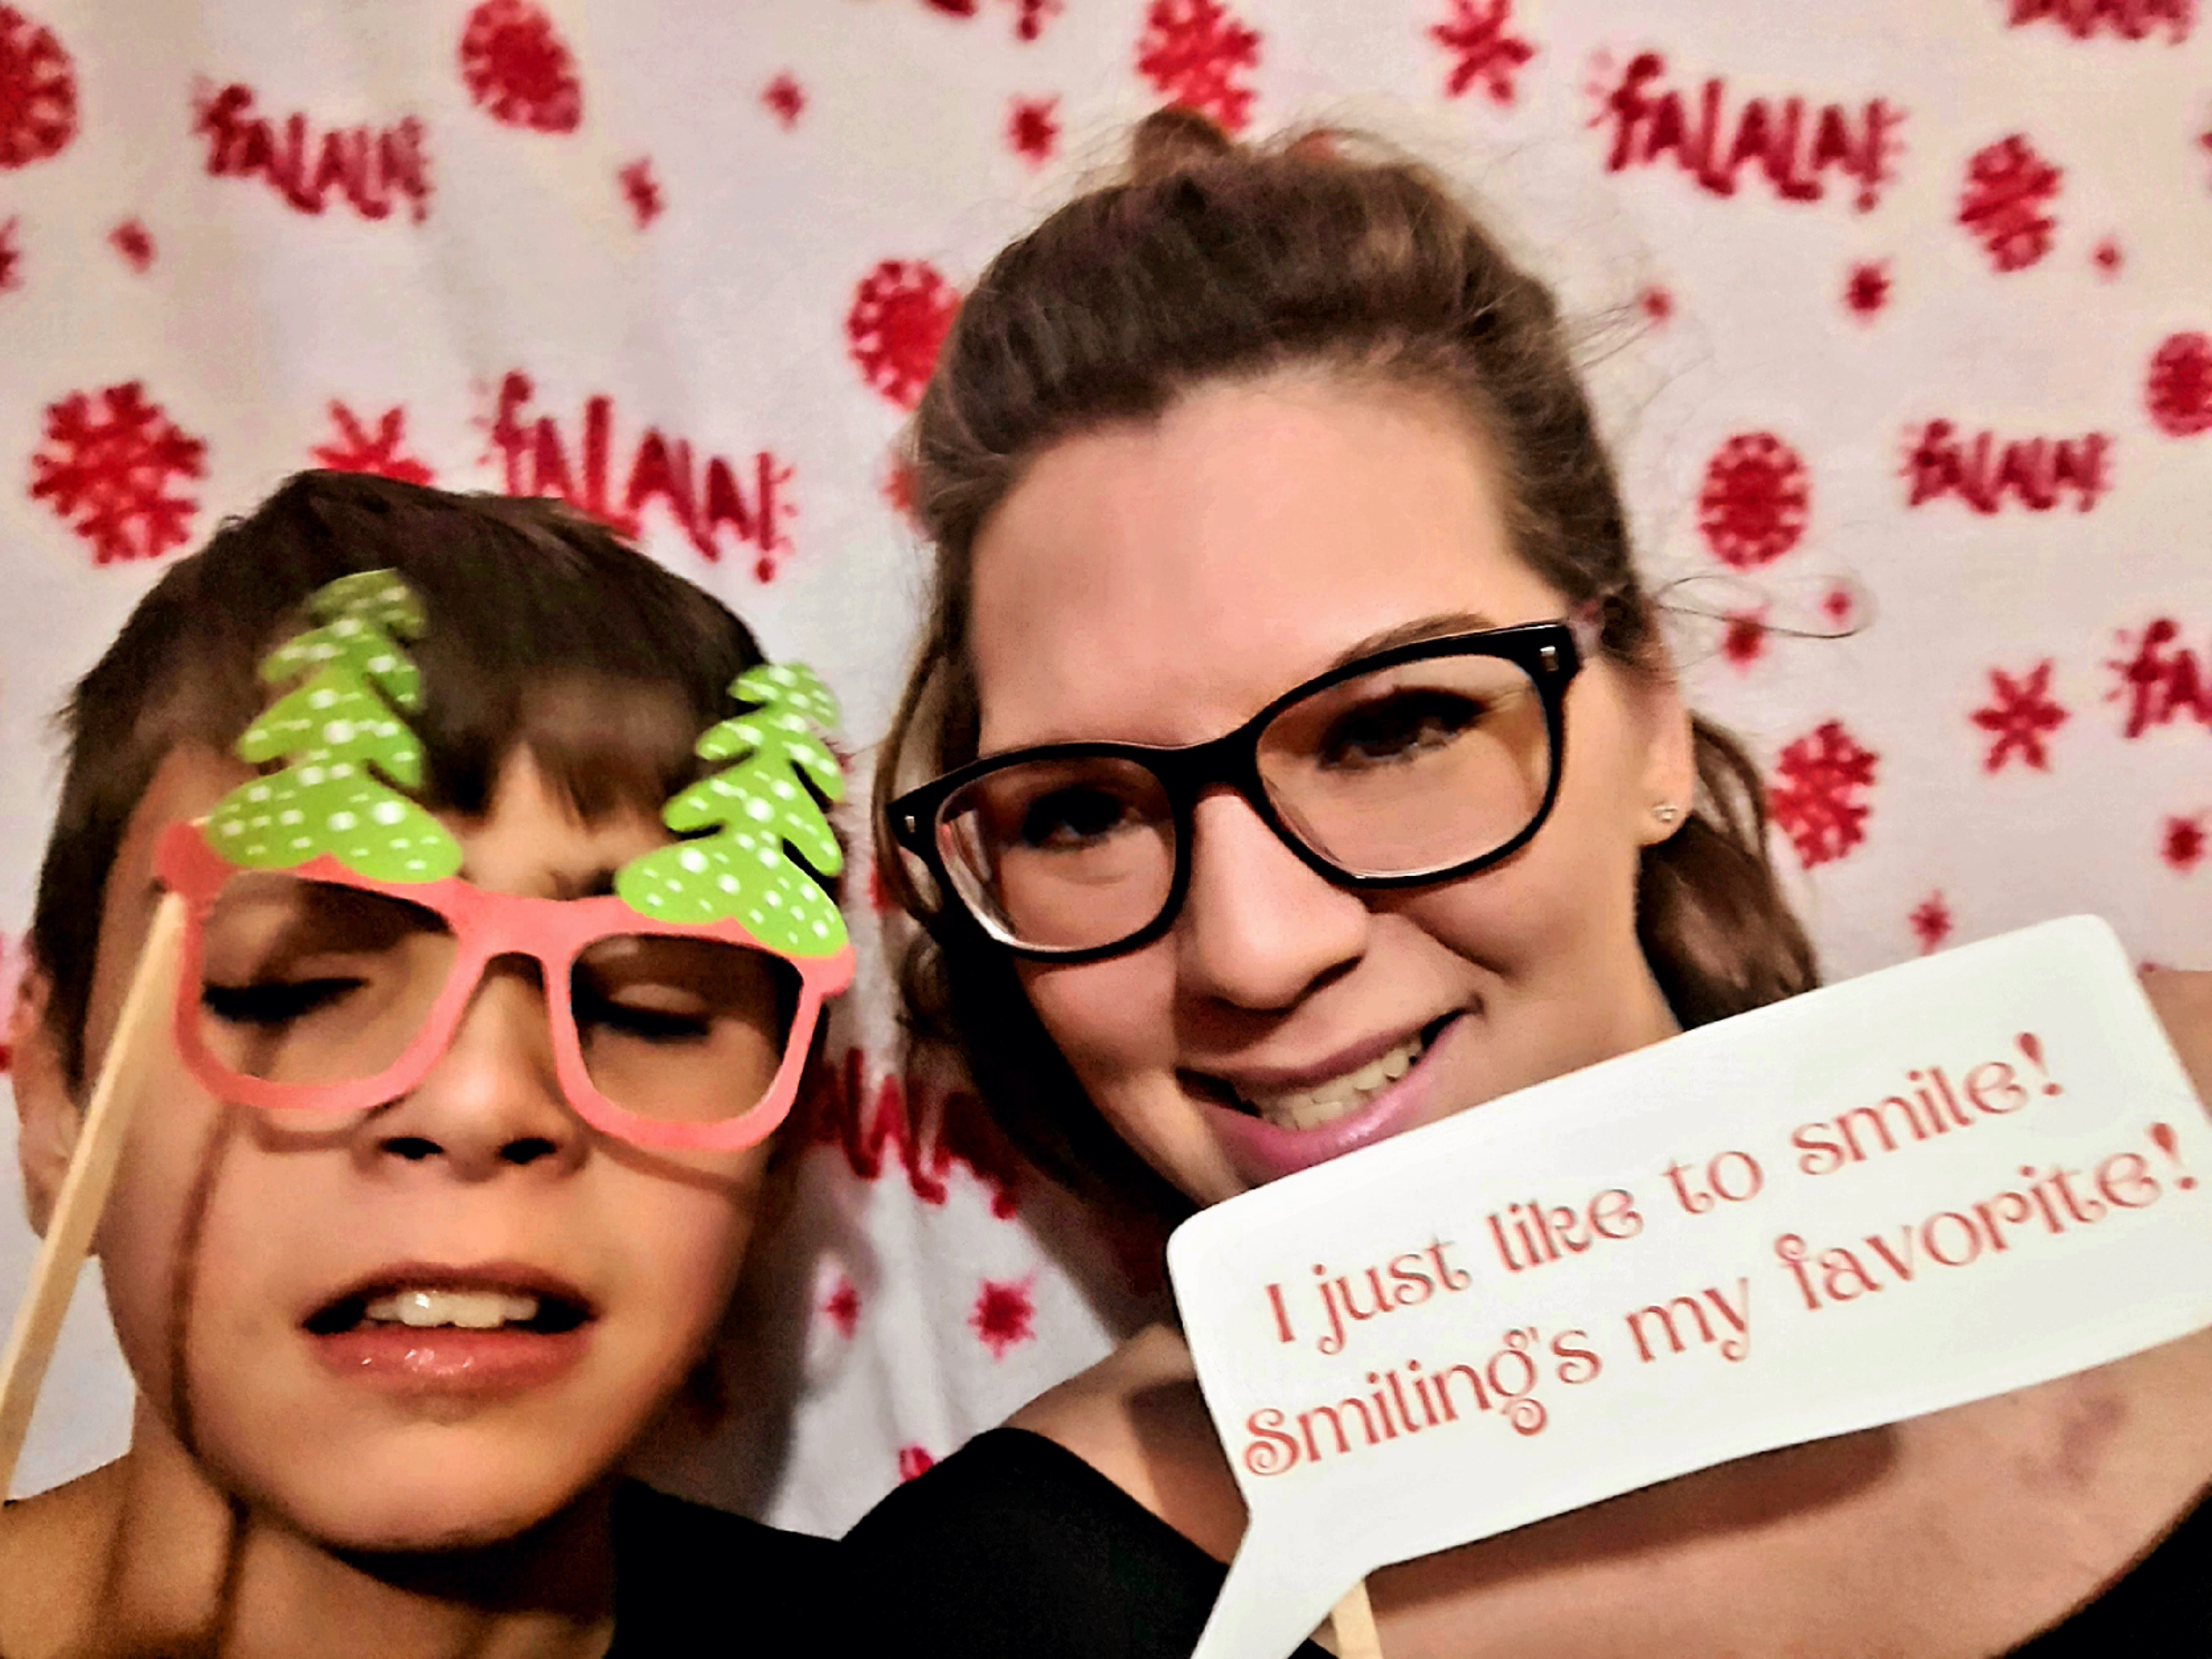 My son and I in the DIY Christmas photobooth set up with a Christmas blanket backdrop on Elf family movie night.